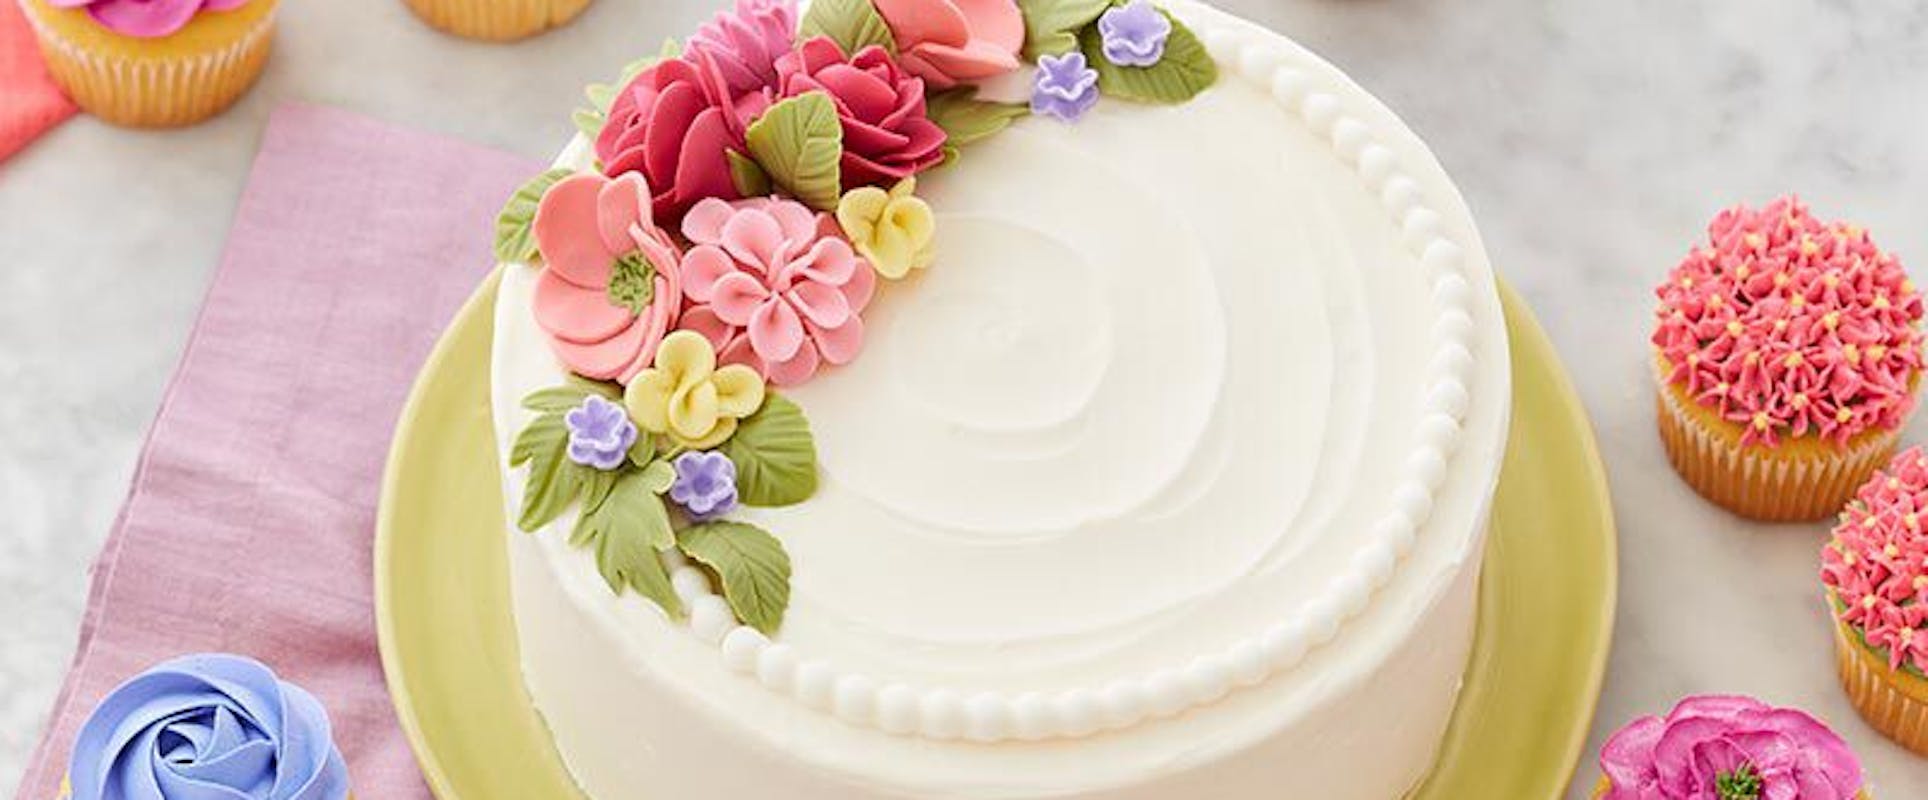 How to Make Edible Glue for Next-Level Cake Designs